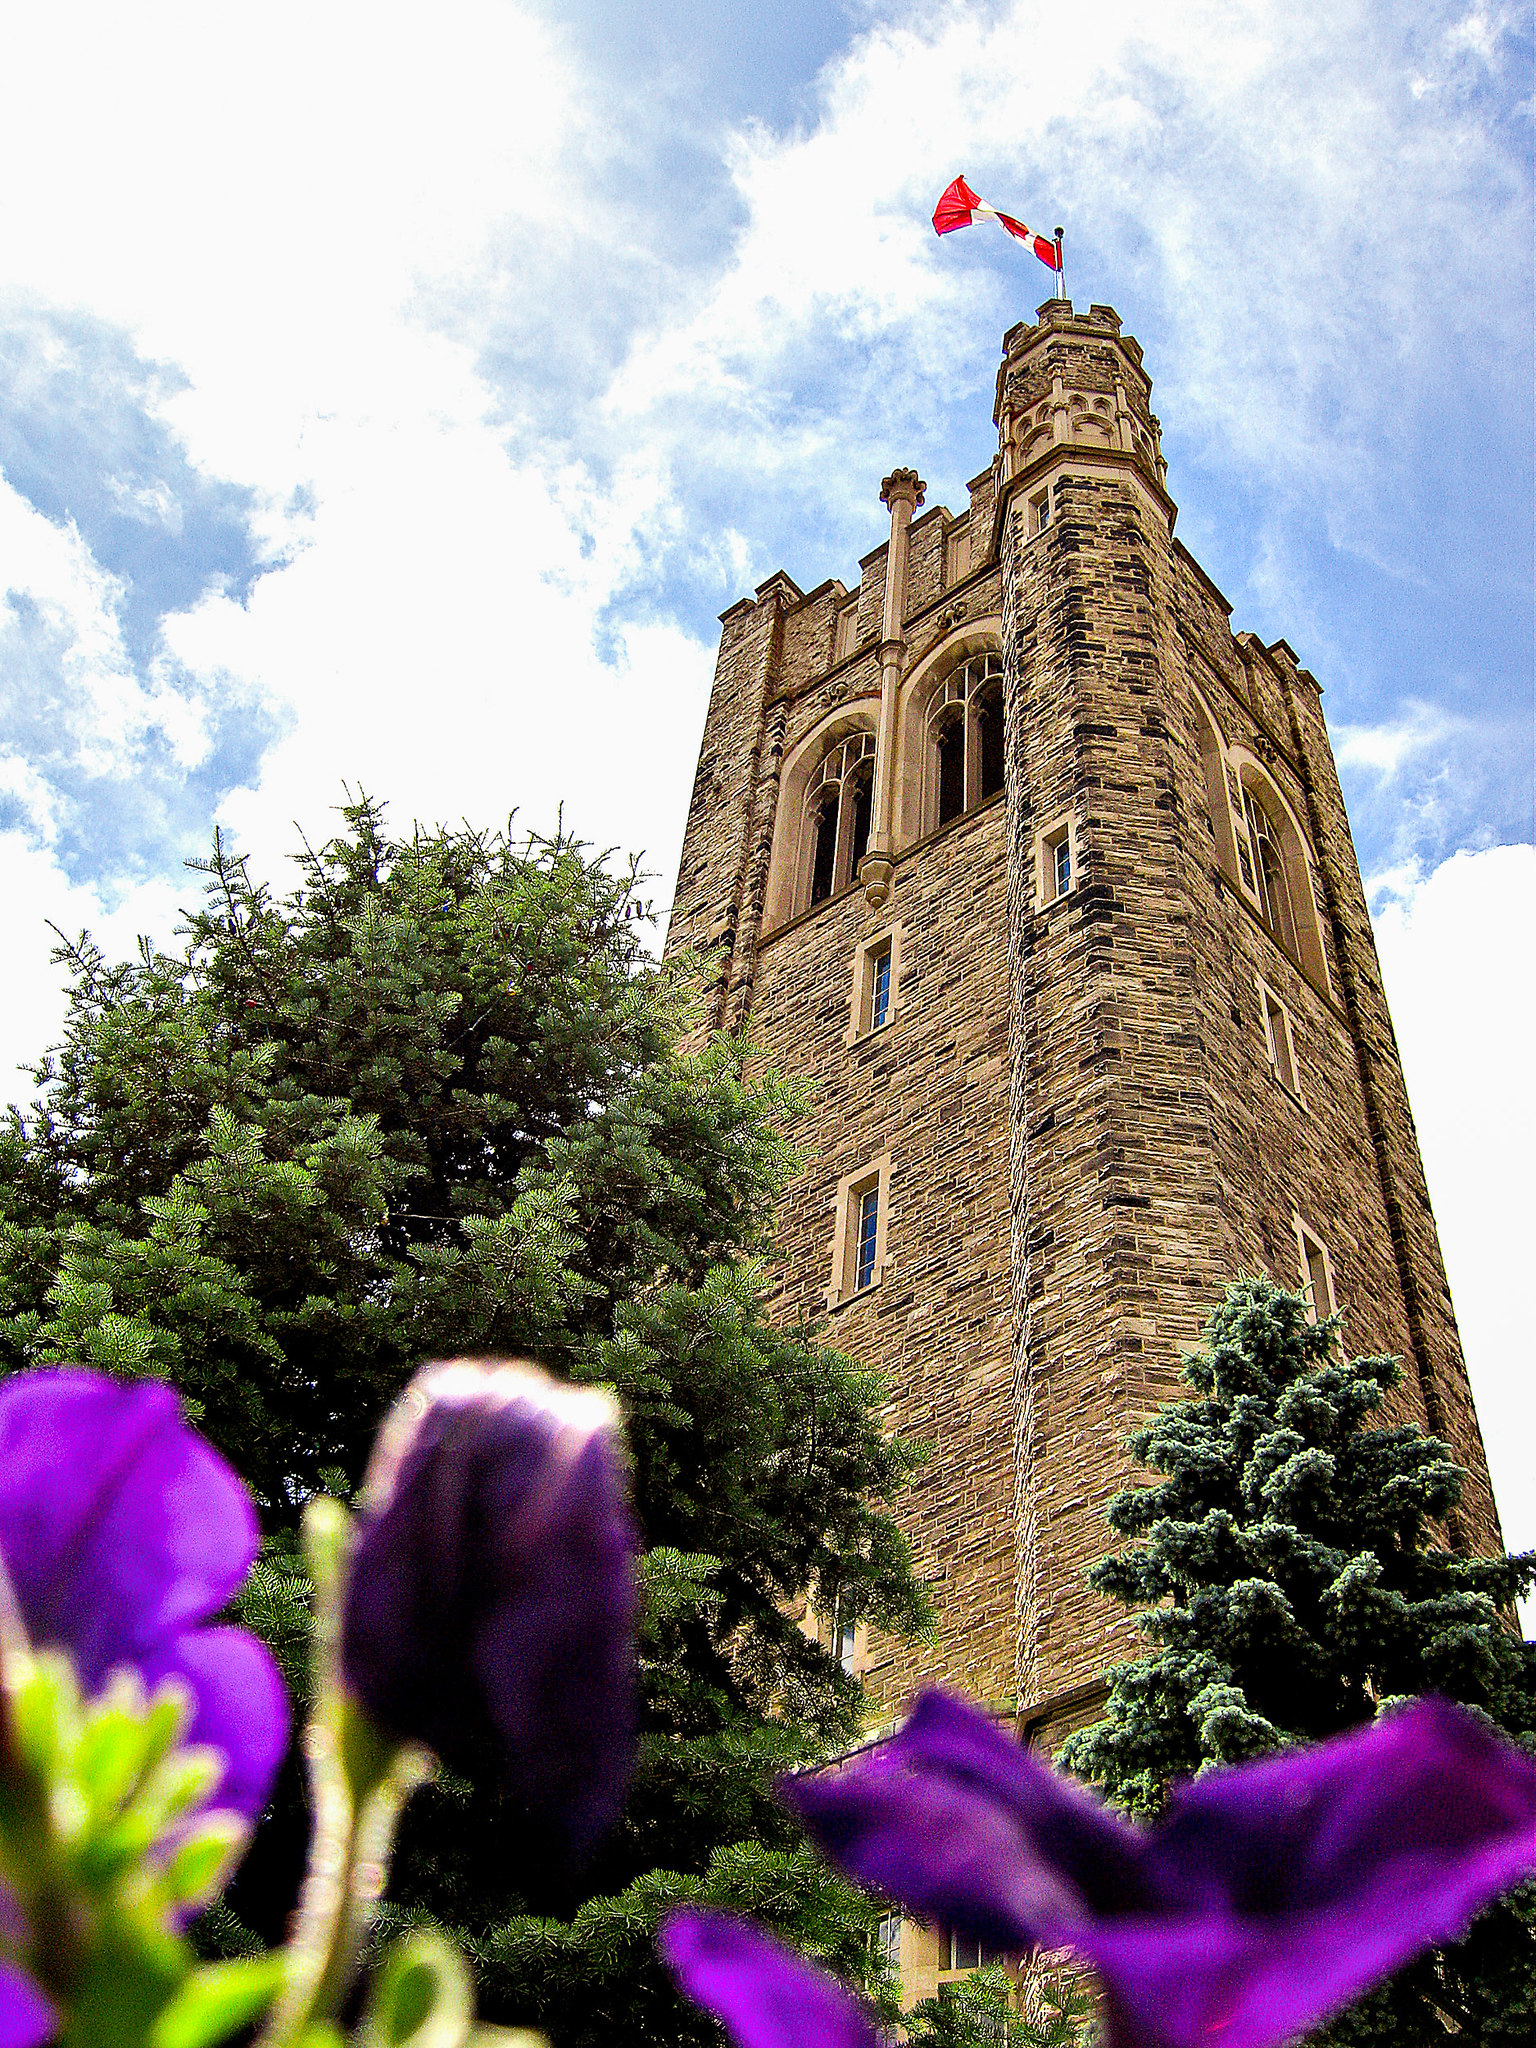 Upward view of University College tower at UWO with purple flowers and trees in the foreground